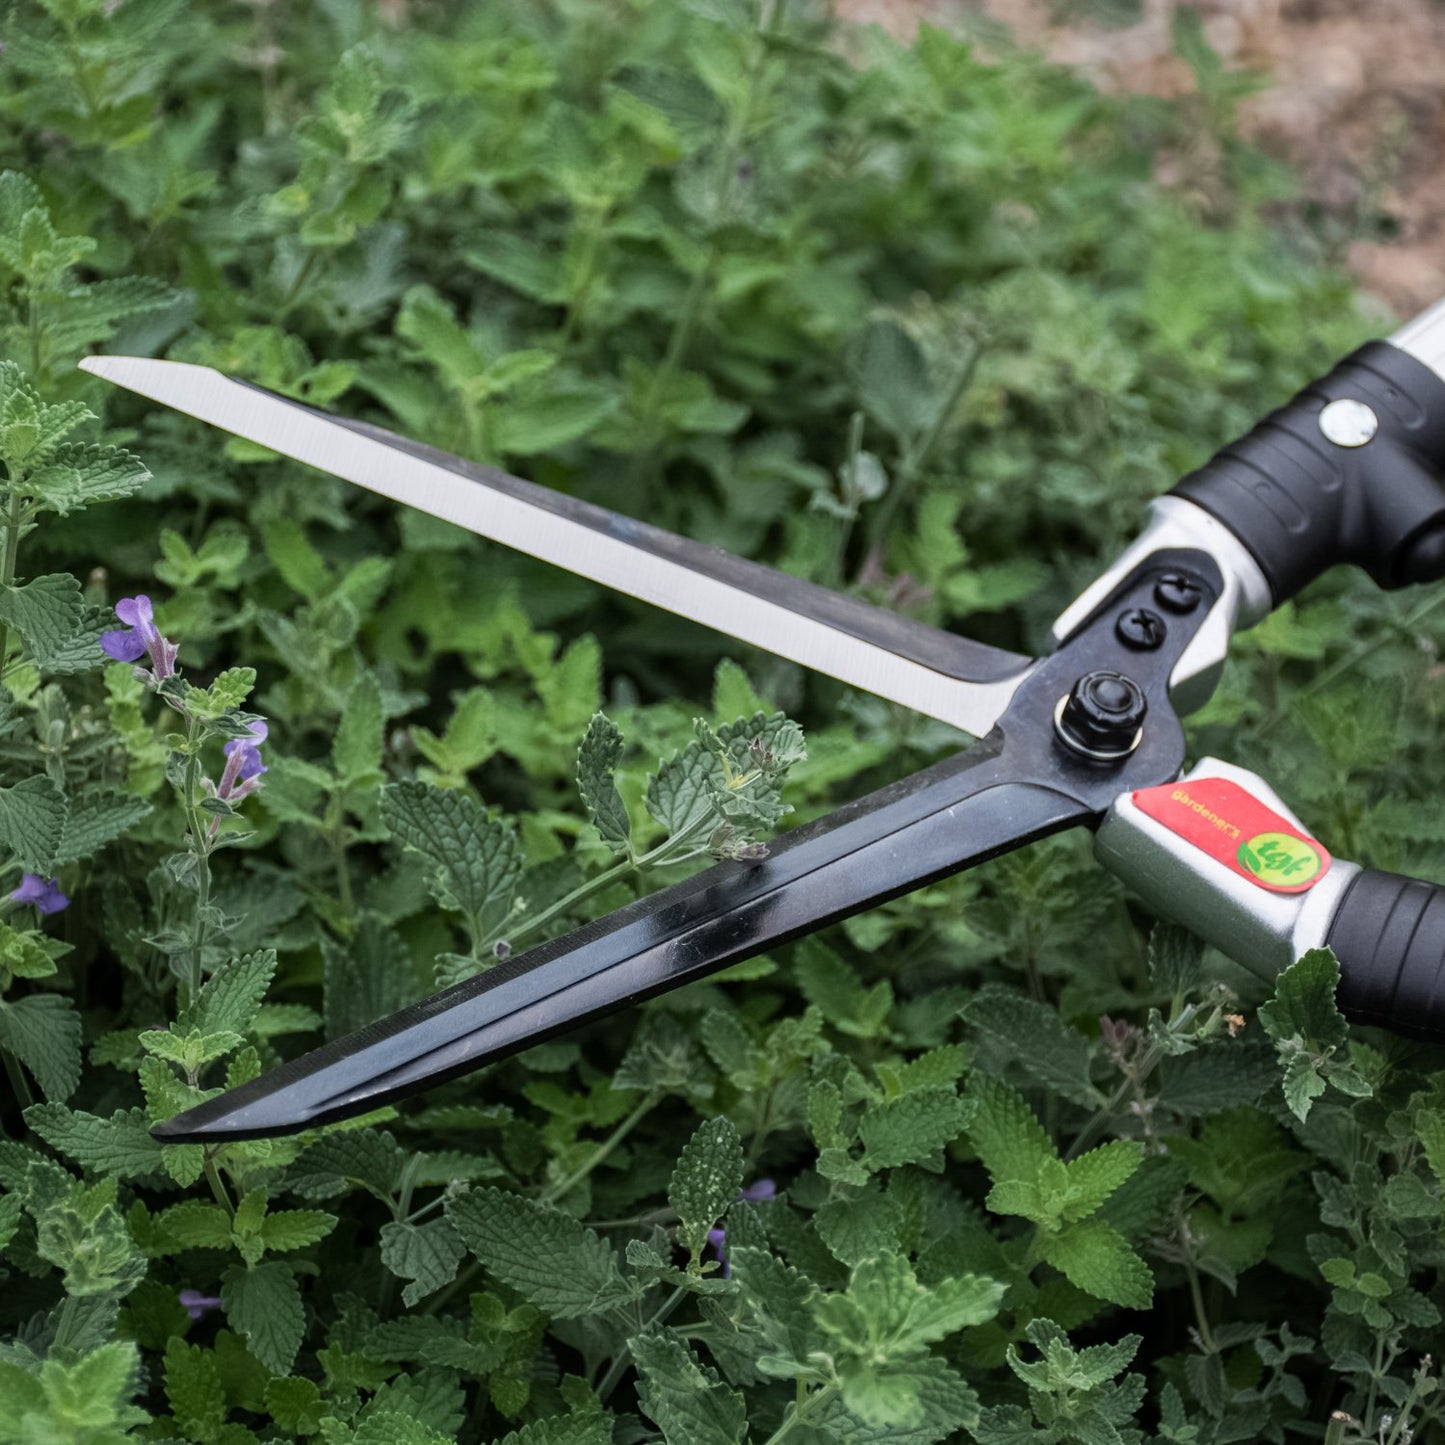 Long Handled Hedge Trimmers and Pruning Shears, 23.5” (60 cm), With Moulded Handgrips and Very Sharp 7” (18 cm) Blade, Lightweight For Gardeners With Hand Weakness, Light But Strong Construction